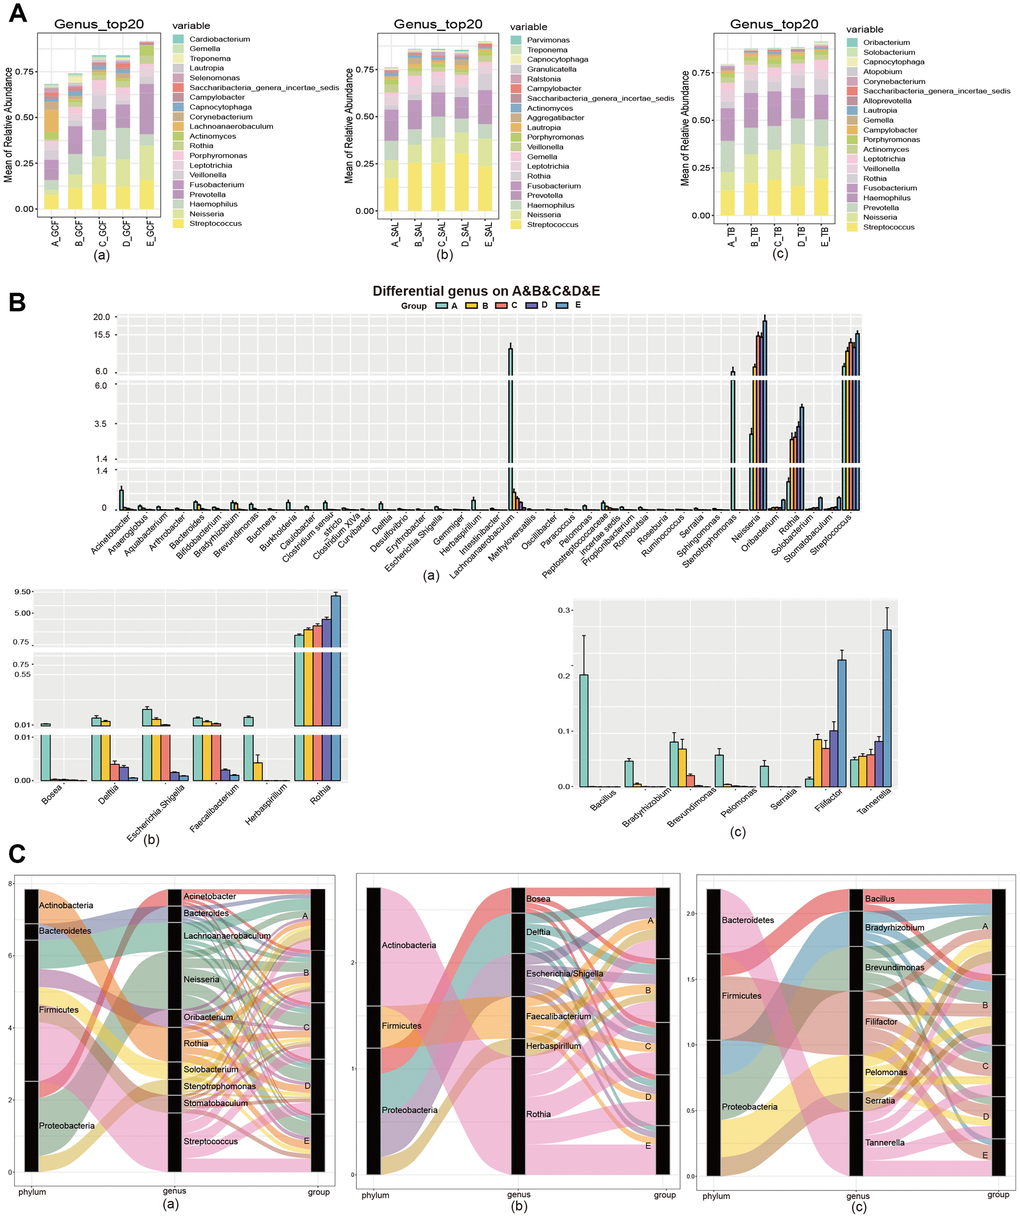 The community variation of oral microbiota with age. (A) The top 20 genera of the microbiota from the GCF, SAL and TB sites. (B) The genus gradually increased or decreased their contents with age. (C) The phyla associated with the different genera with high abundance. (a) GCF; (b) SAL; (c) TB.